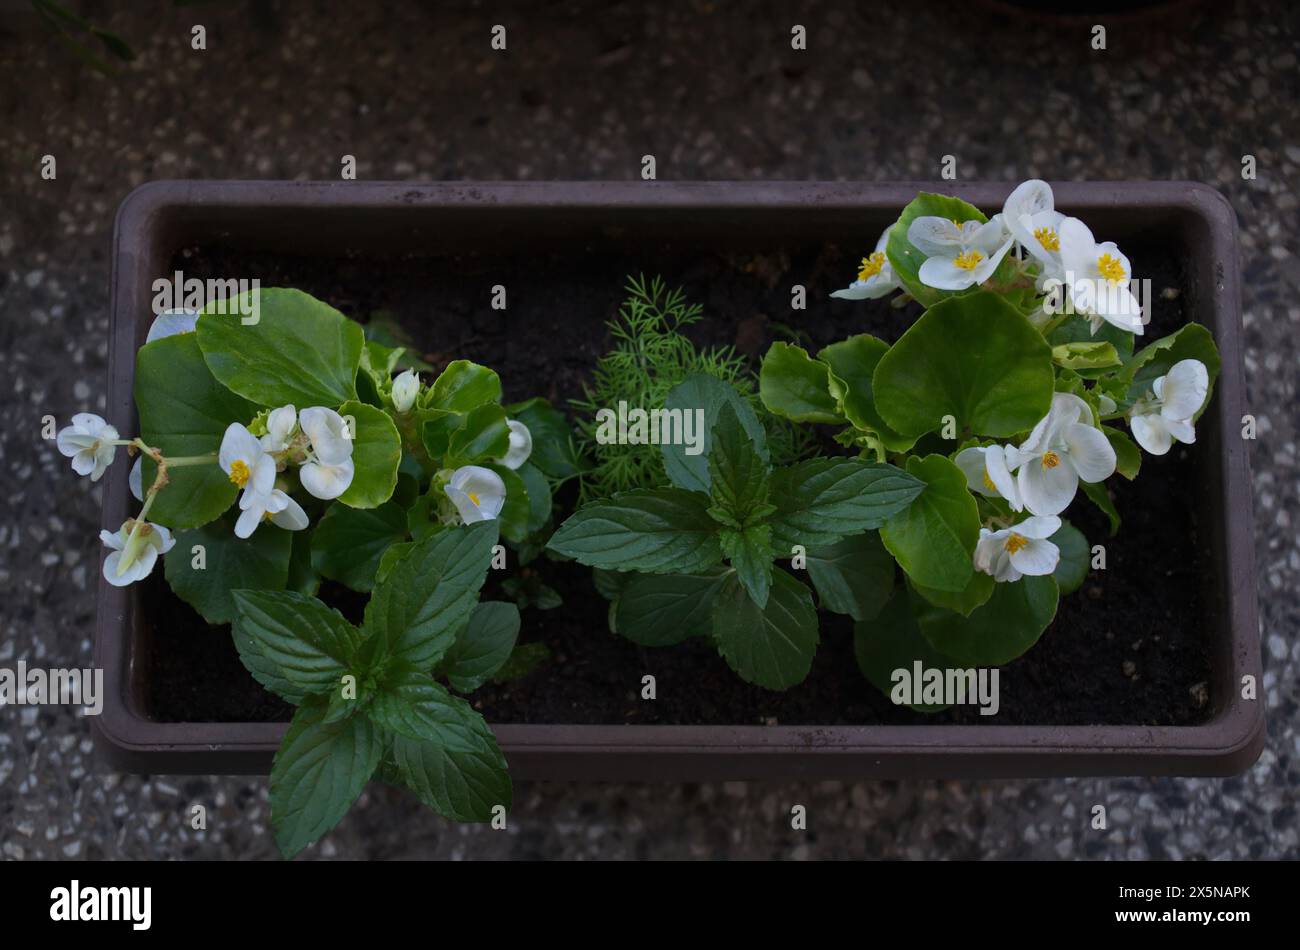 Blooming white begonia and fresh sprouted stems of Mentha or mint on the balcony in a pot, Sofia, Bulgaria Stock Photo